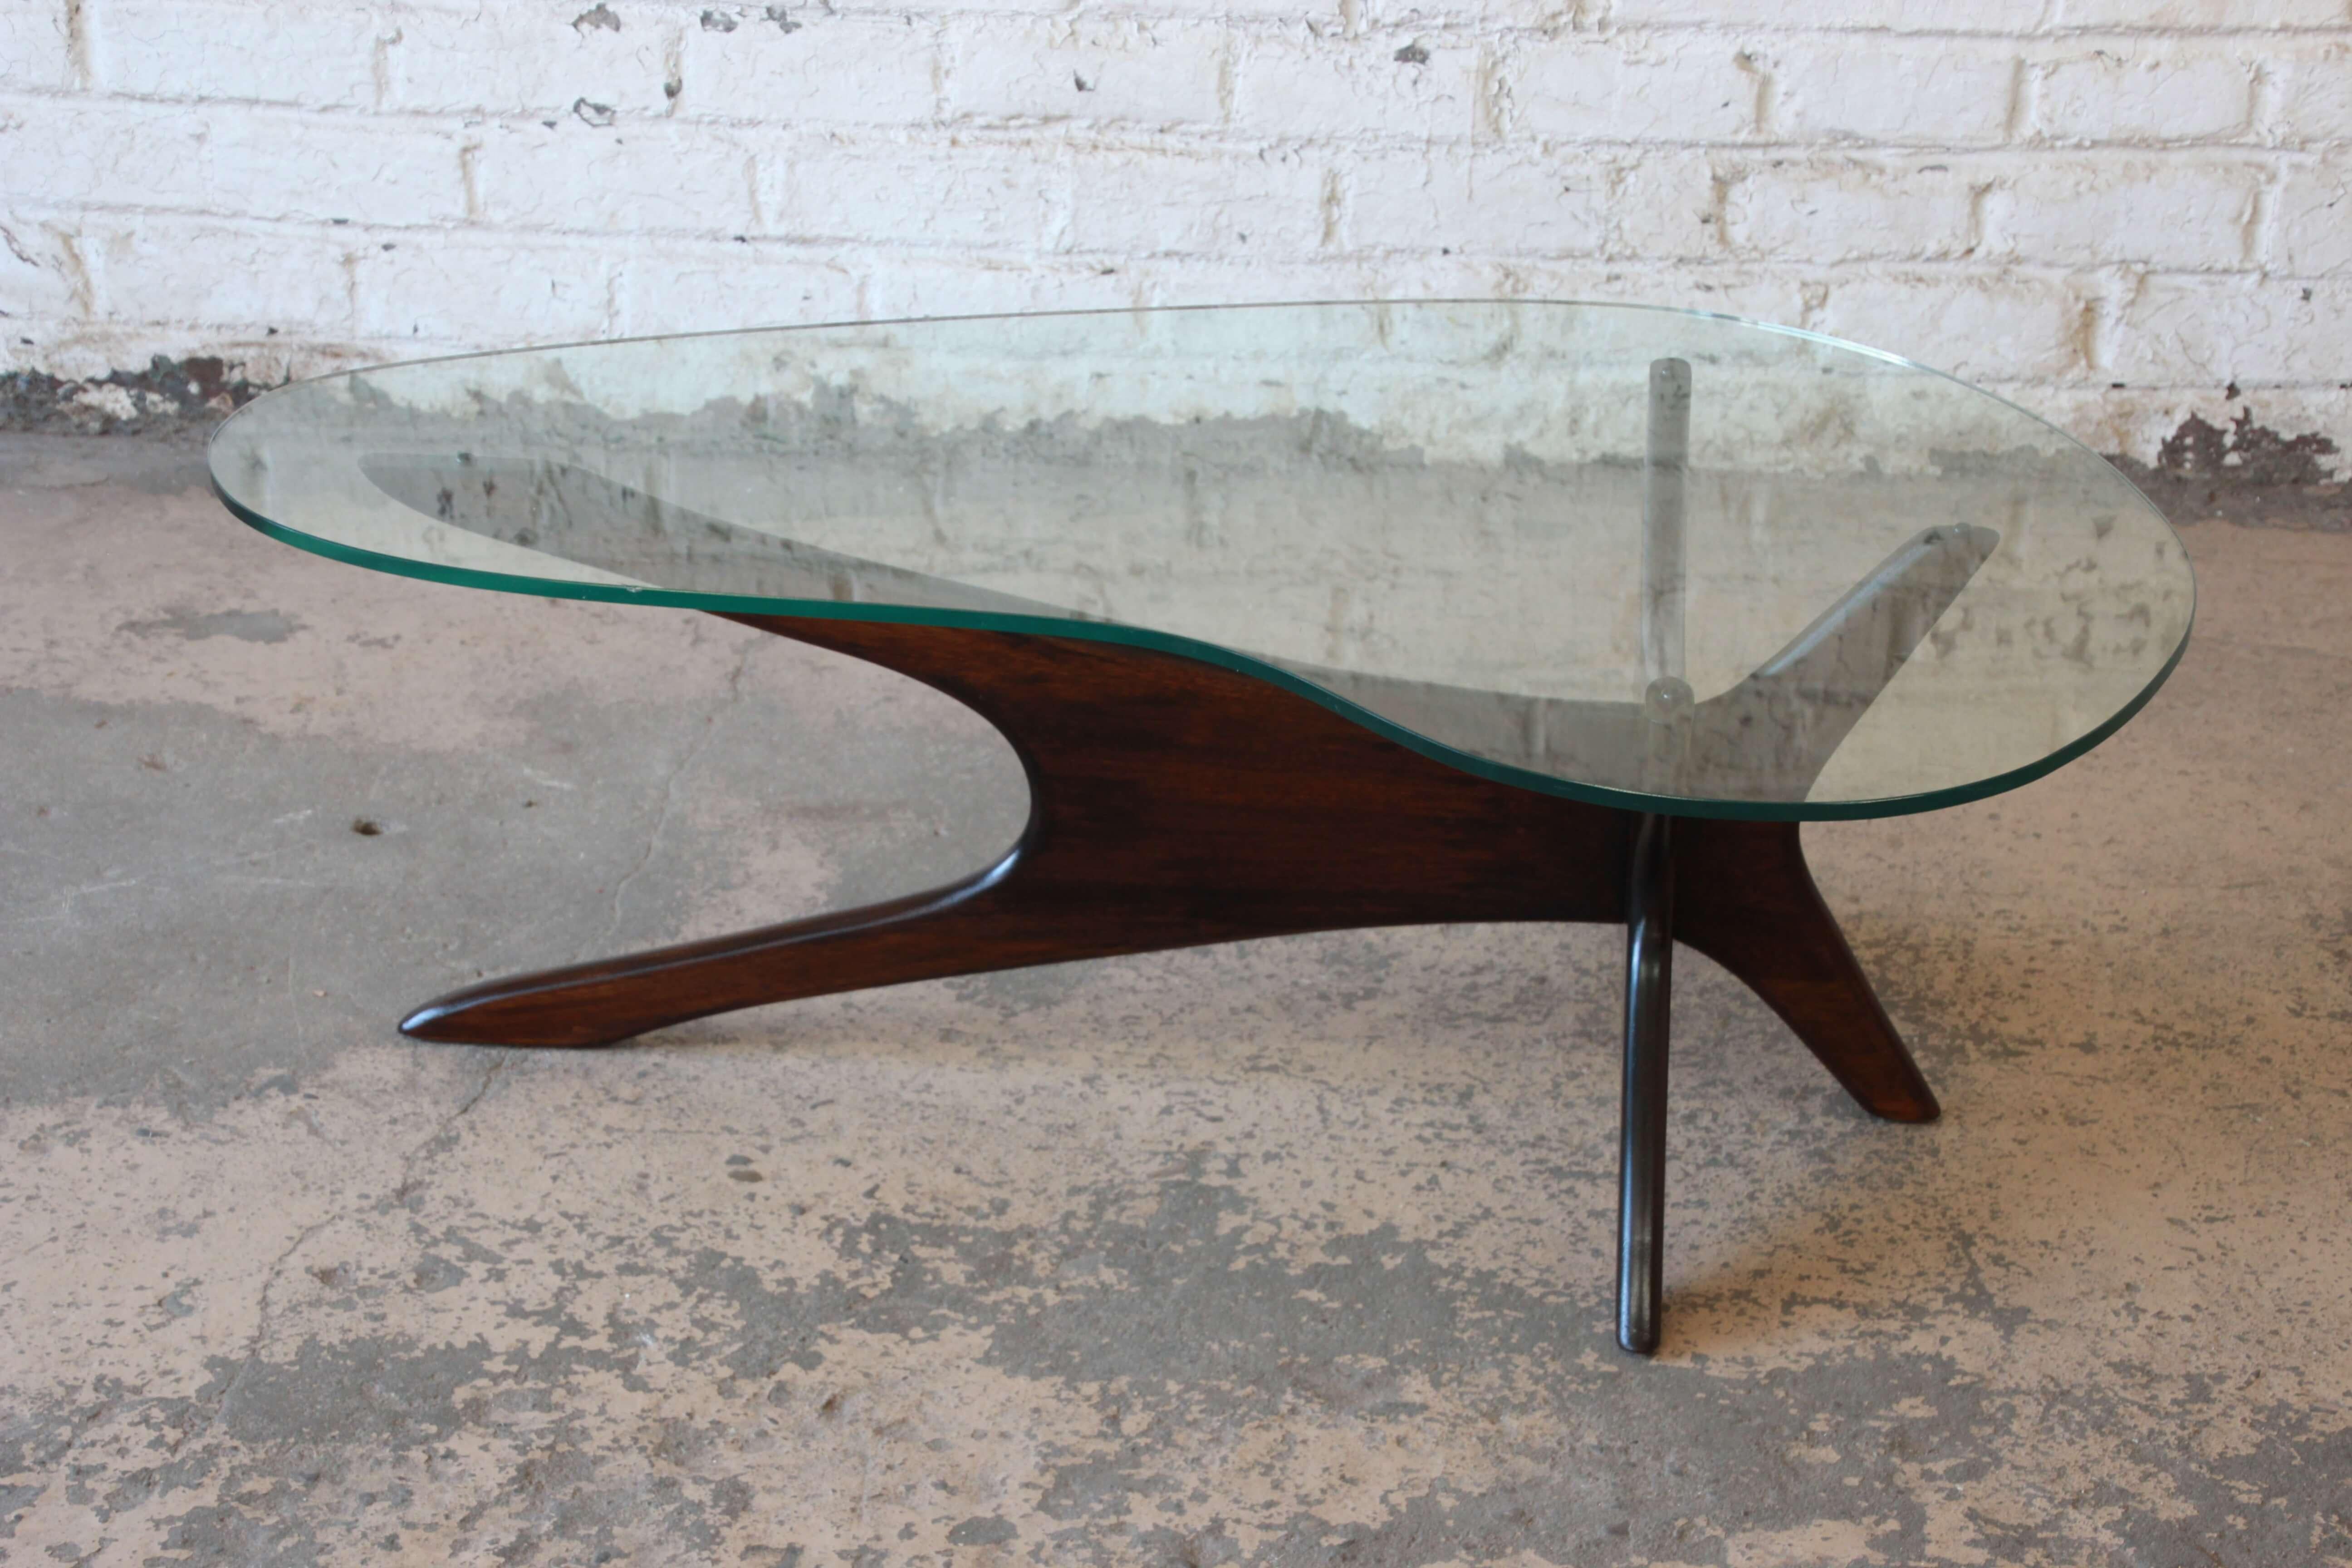 Offering a very nice dark walnut coffee table by Adrian Pearsall for Craft Associates. The table has a unique asymmetrical design with a curved glass top. This elegant modern design displays the foundation of many of Pearsall's designs. This table